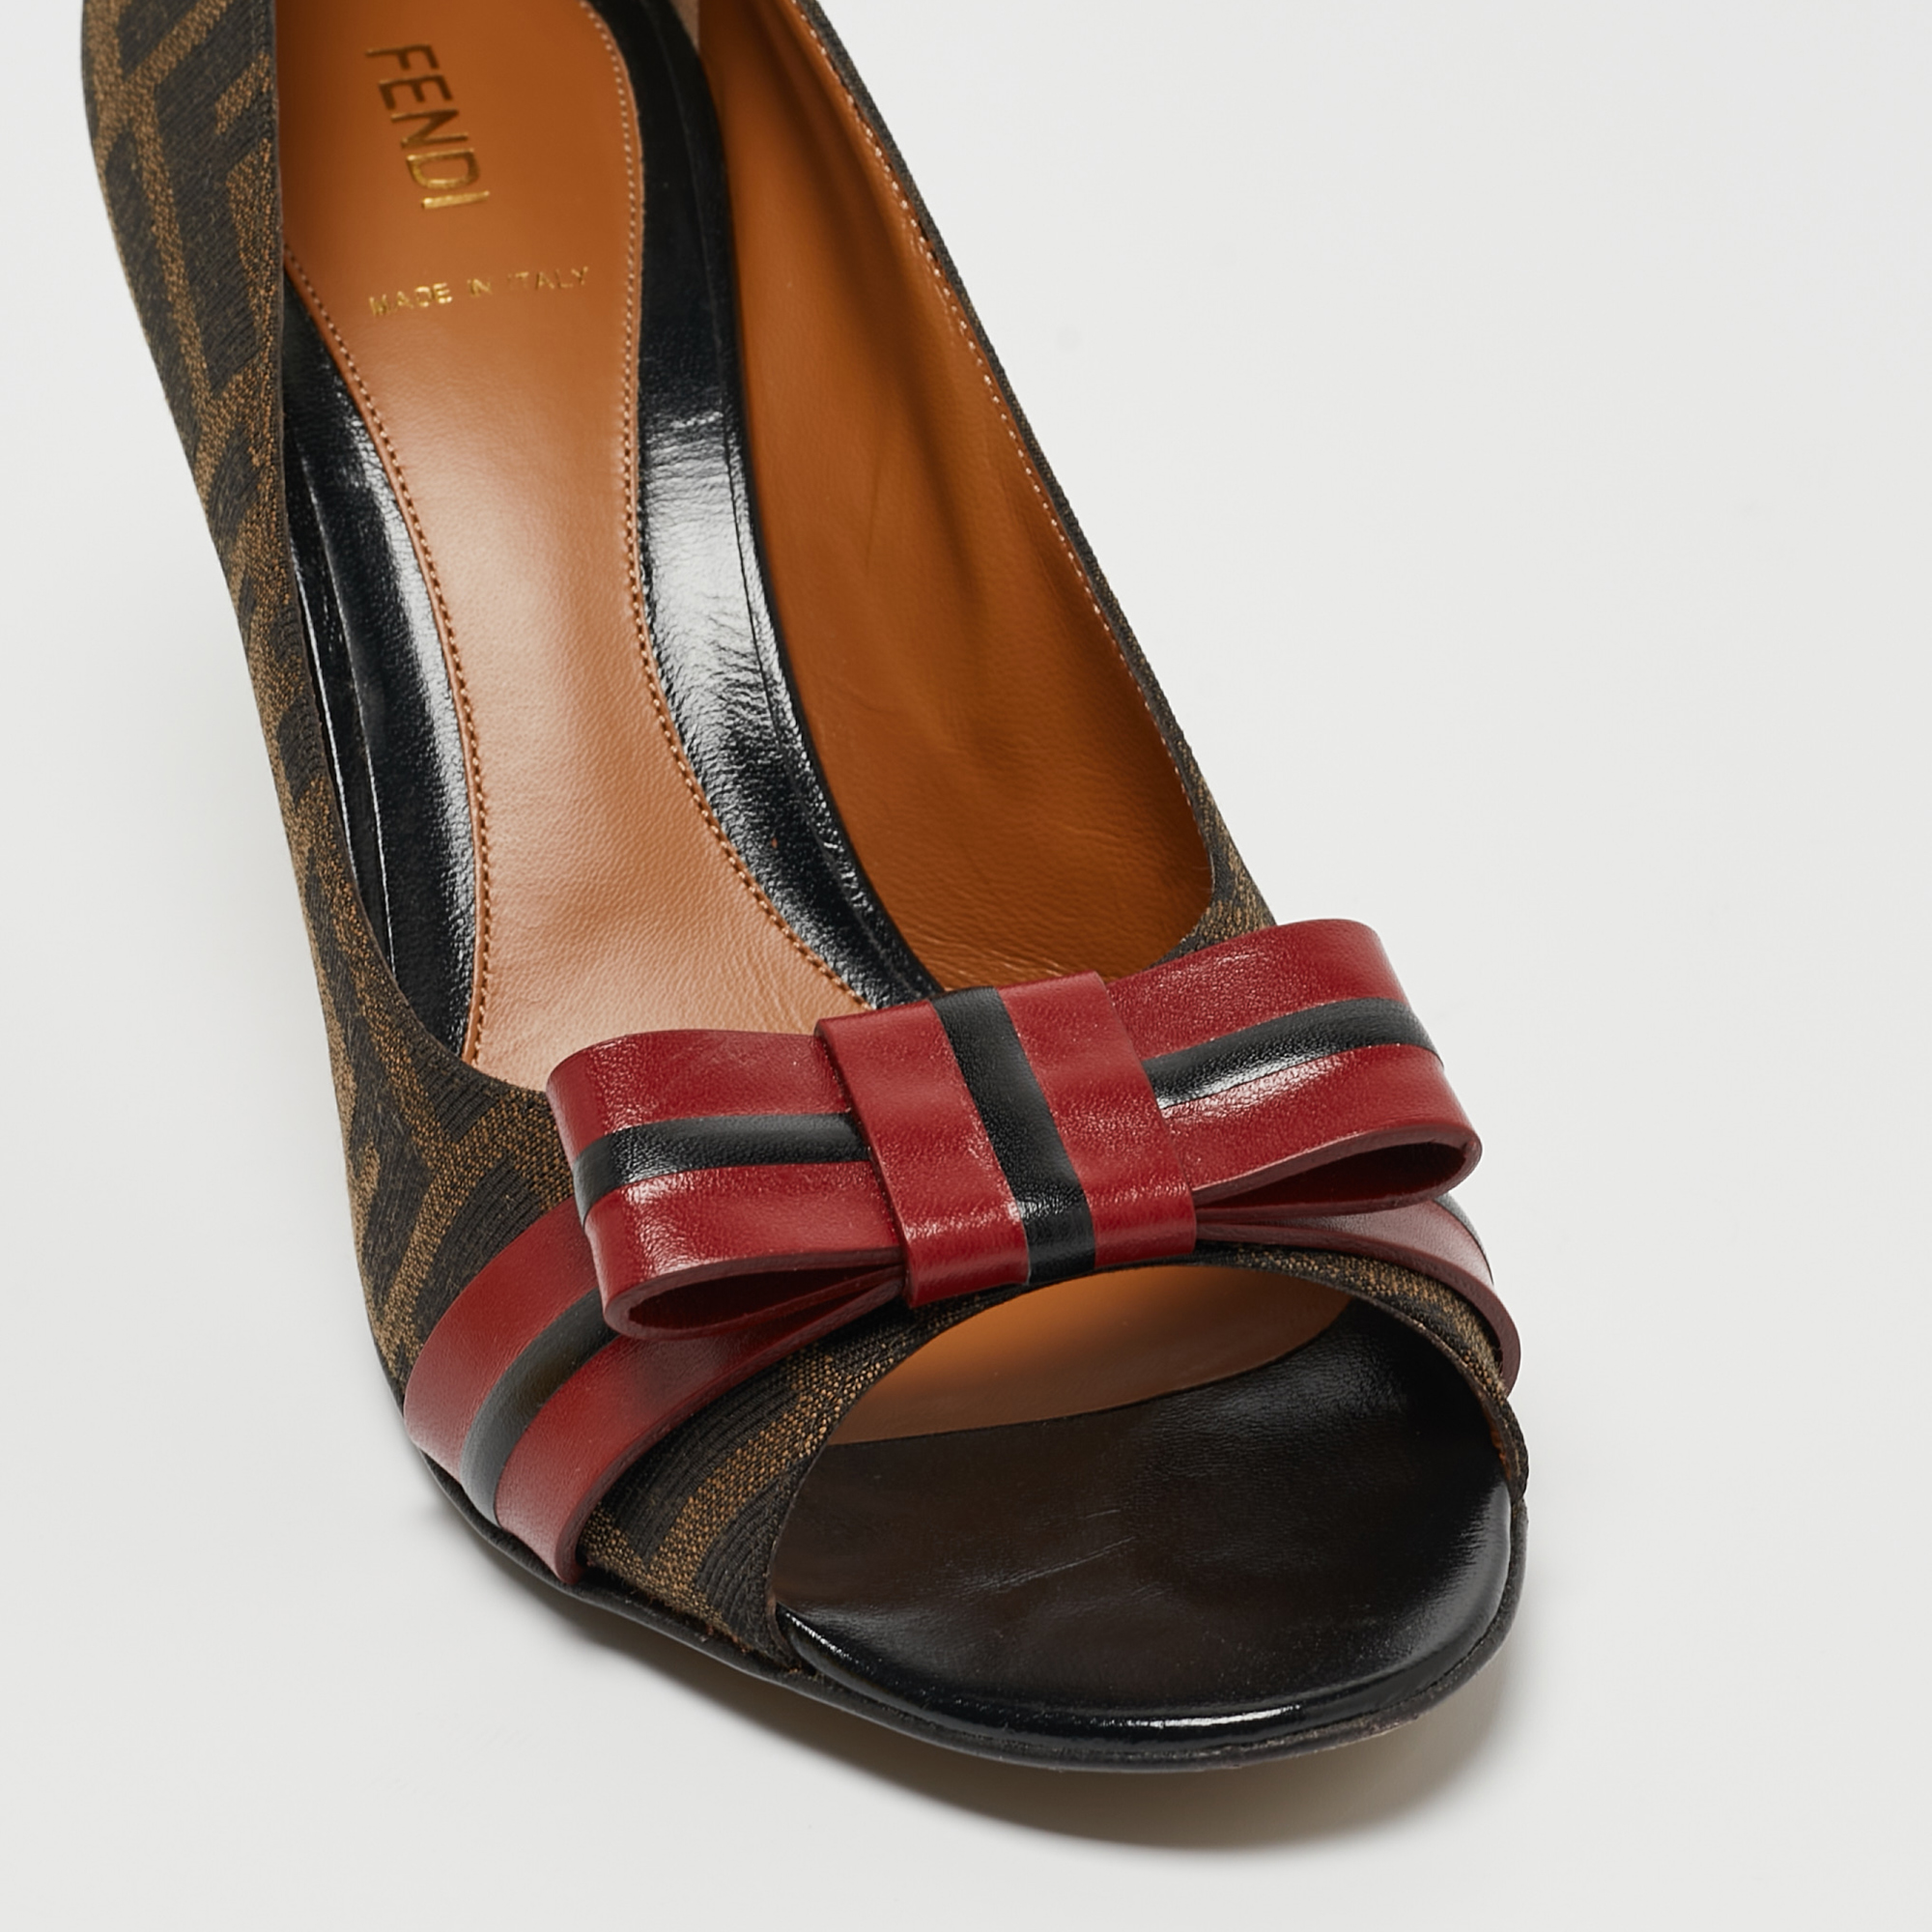 Fendi Brown/Burgundy Tobacco Zucca Canvas And Leather Bow Pumps Size 41